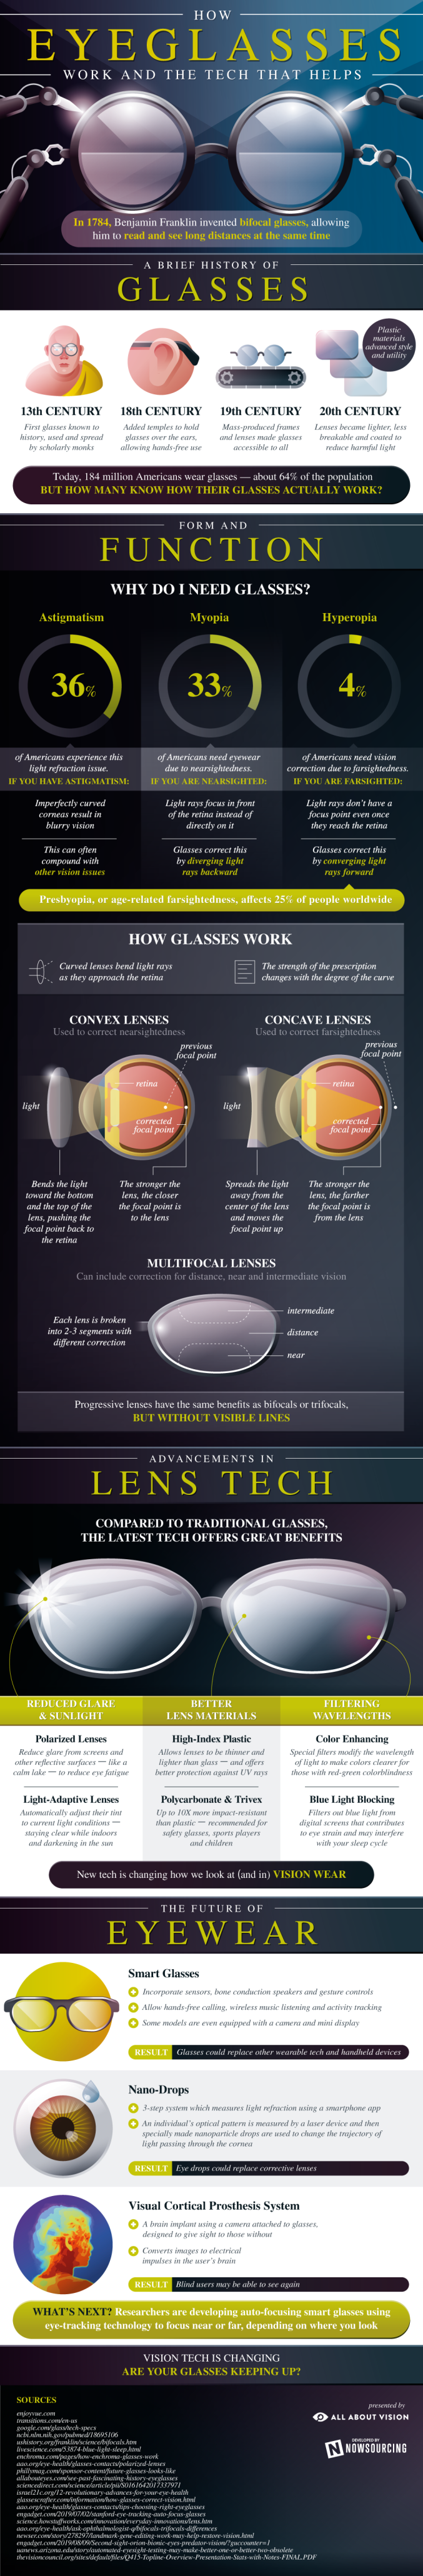 How Eyeglasses Work And The Tech That Helps